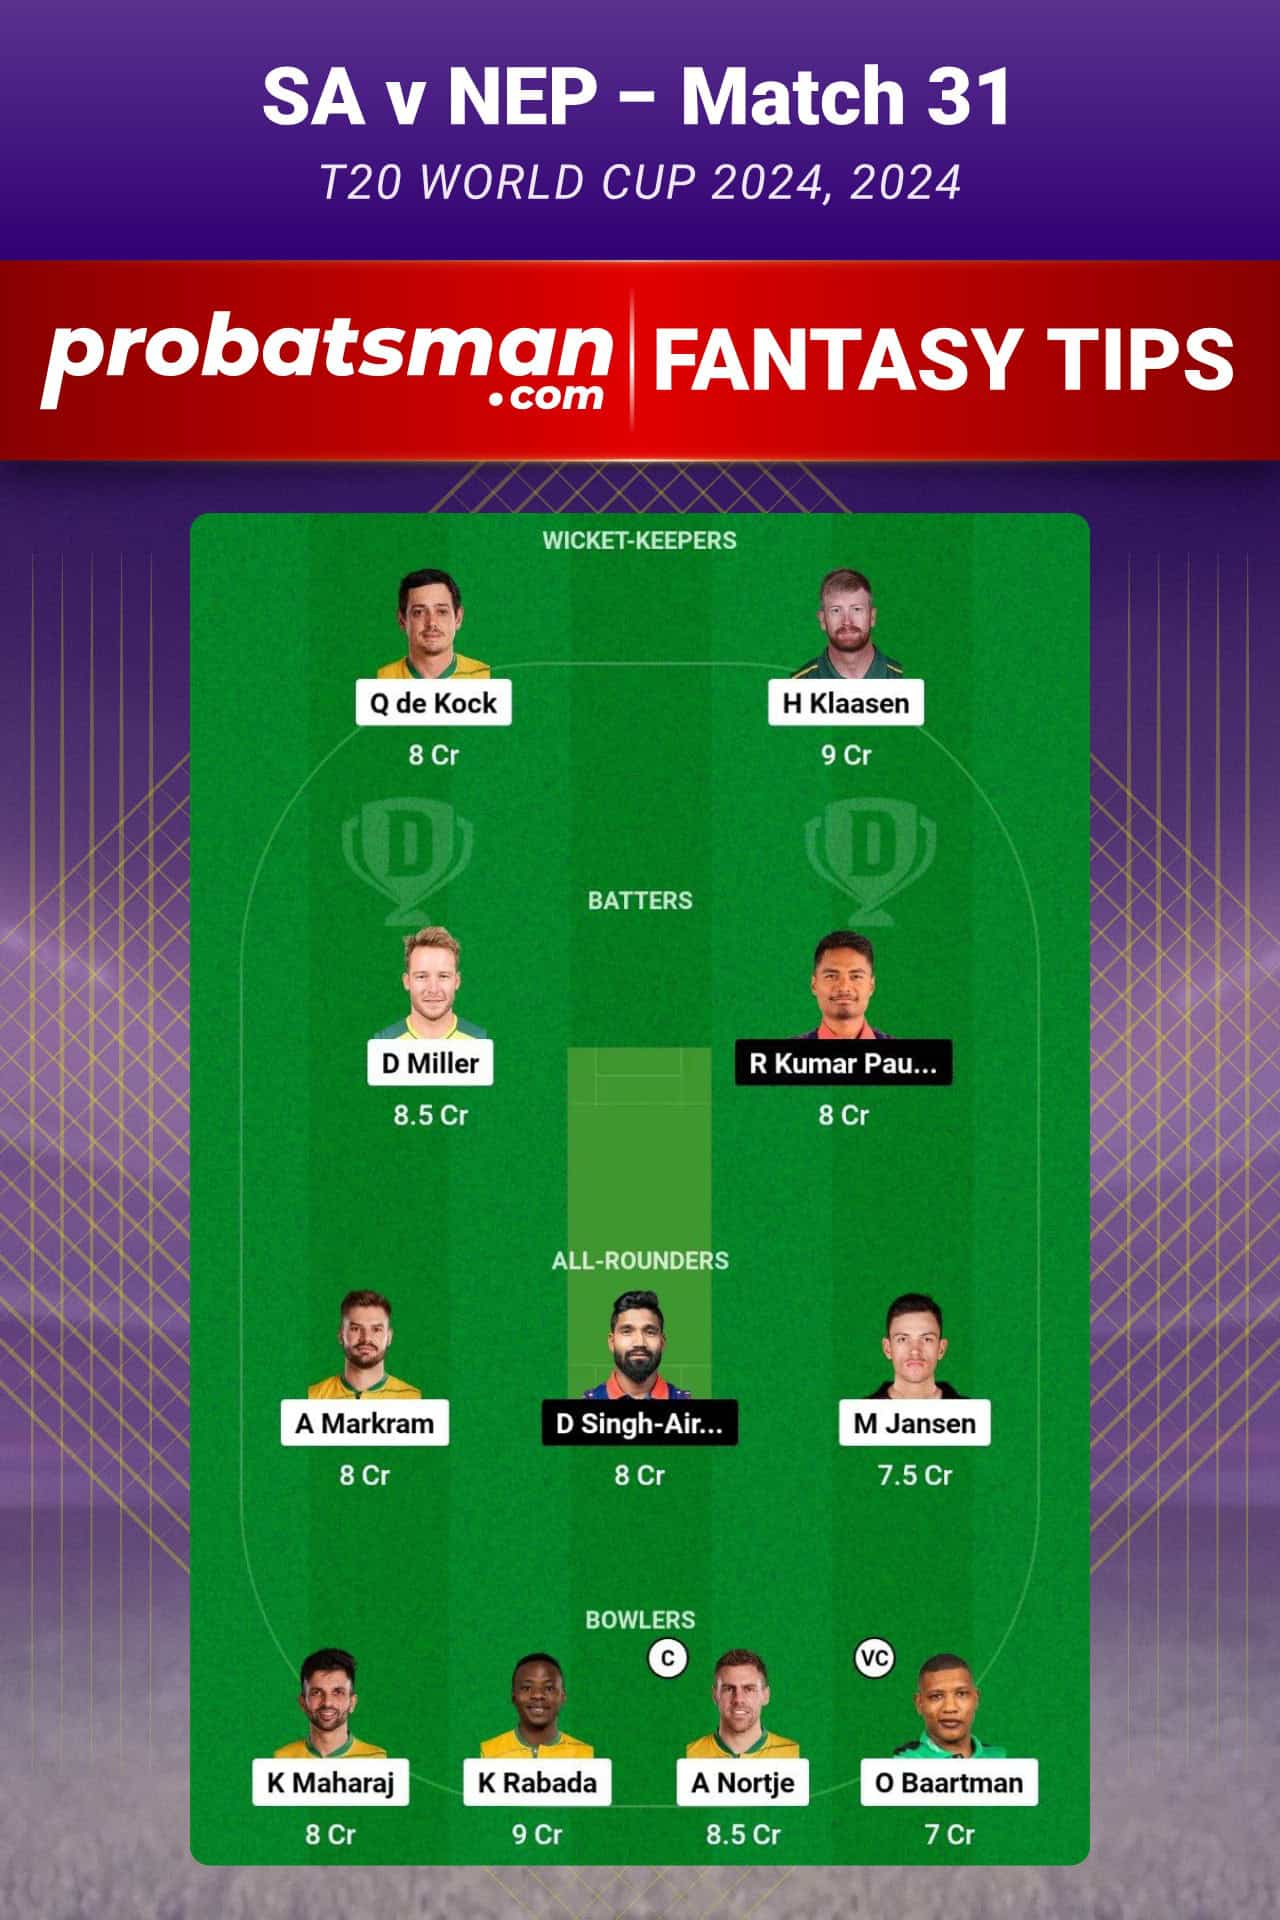 SA vs NEP Dream11 Prediction For Match 31 of T20 World Cup 2024